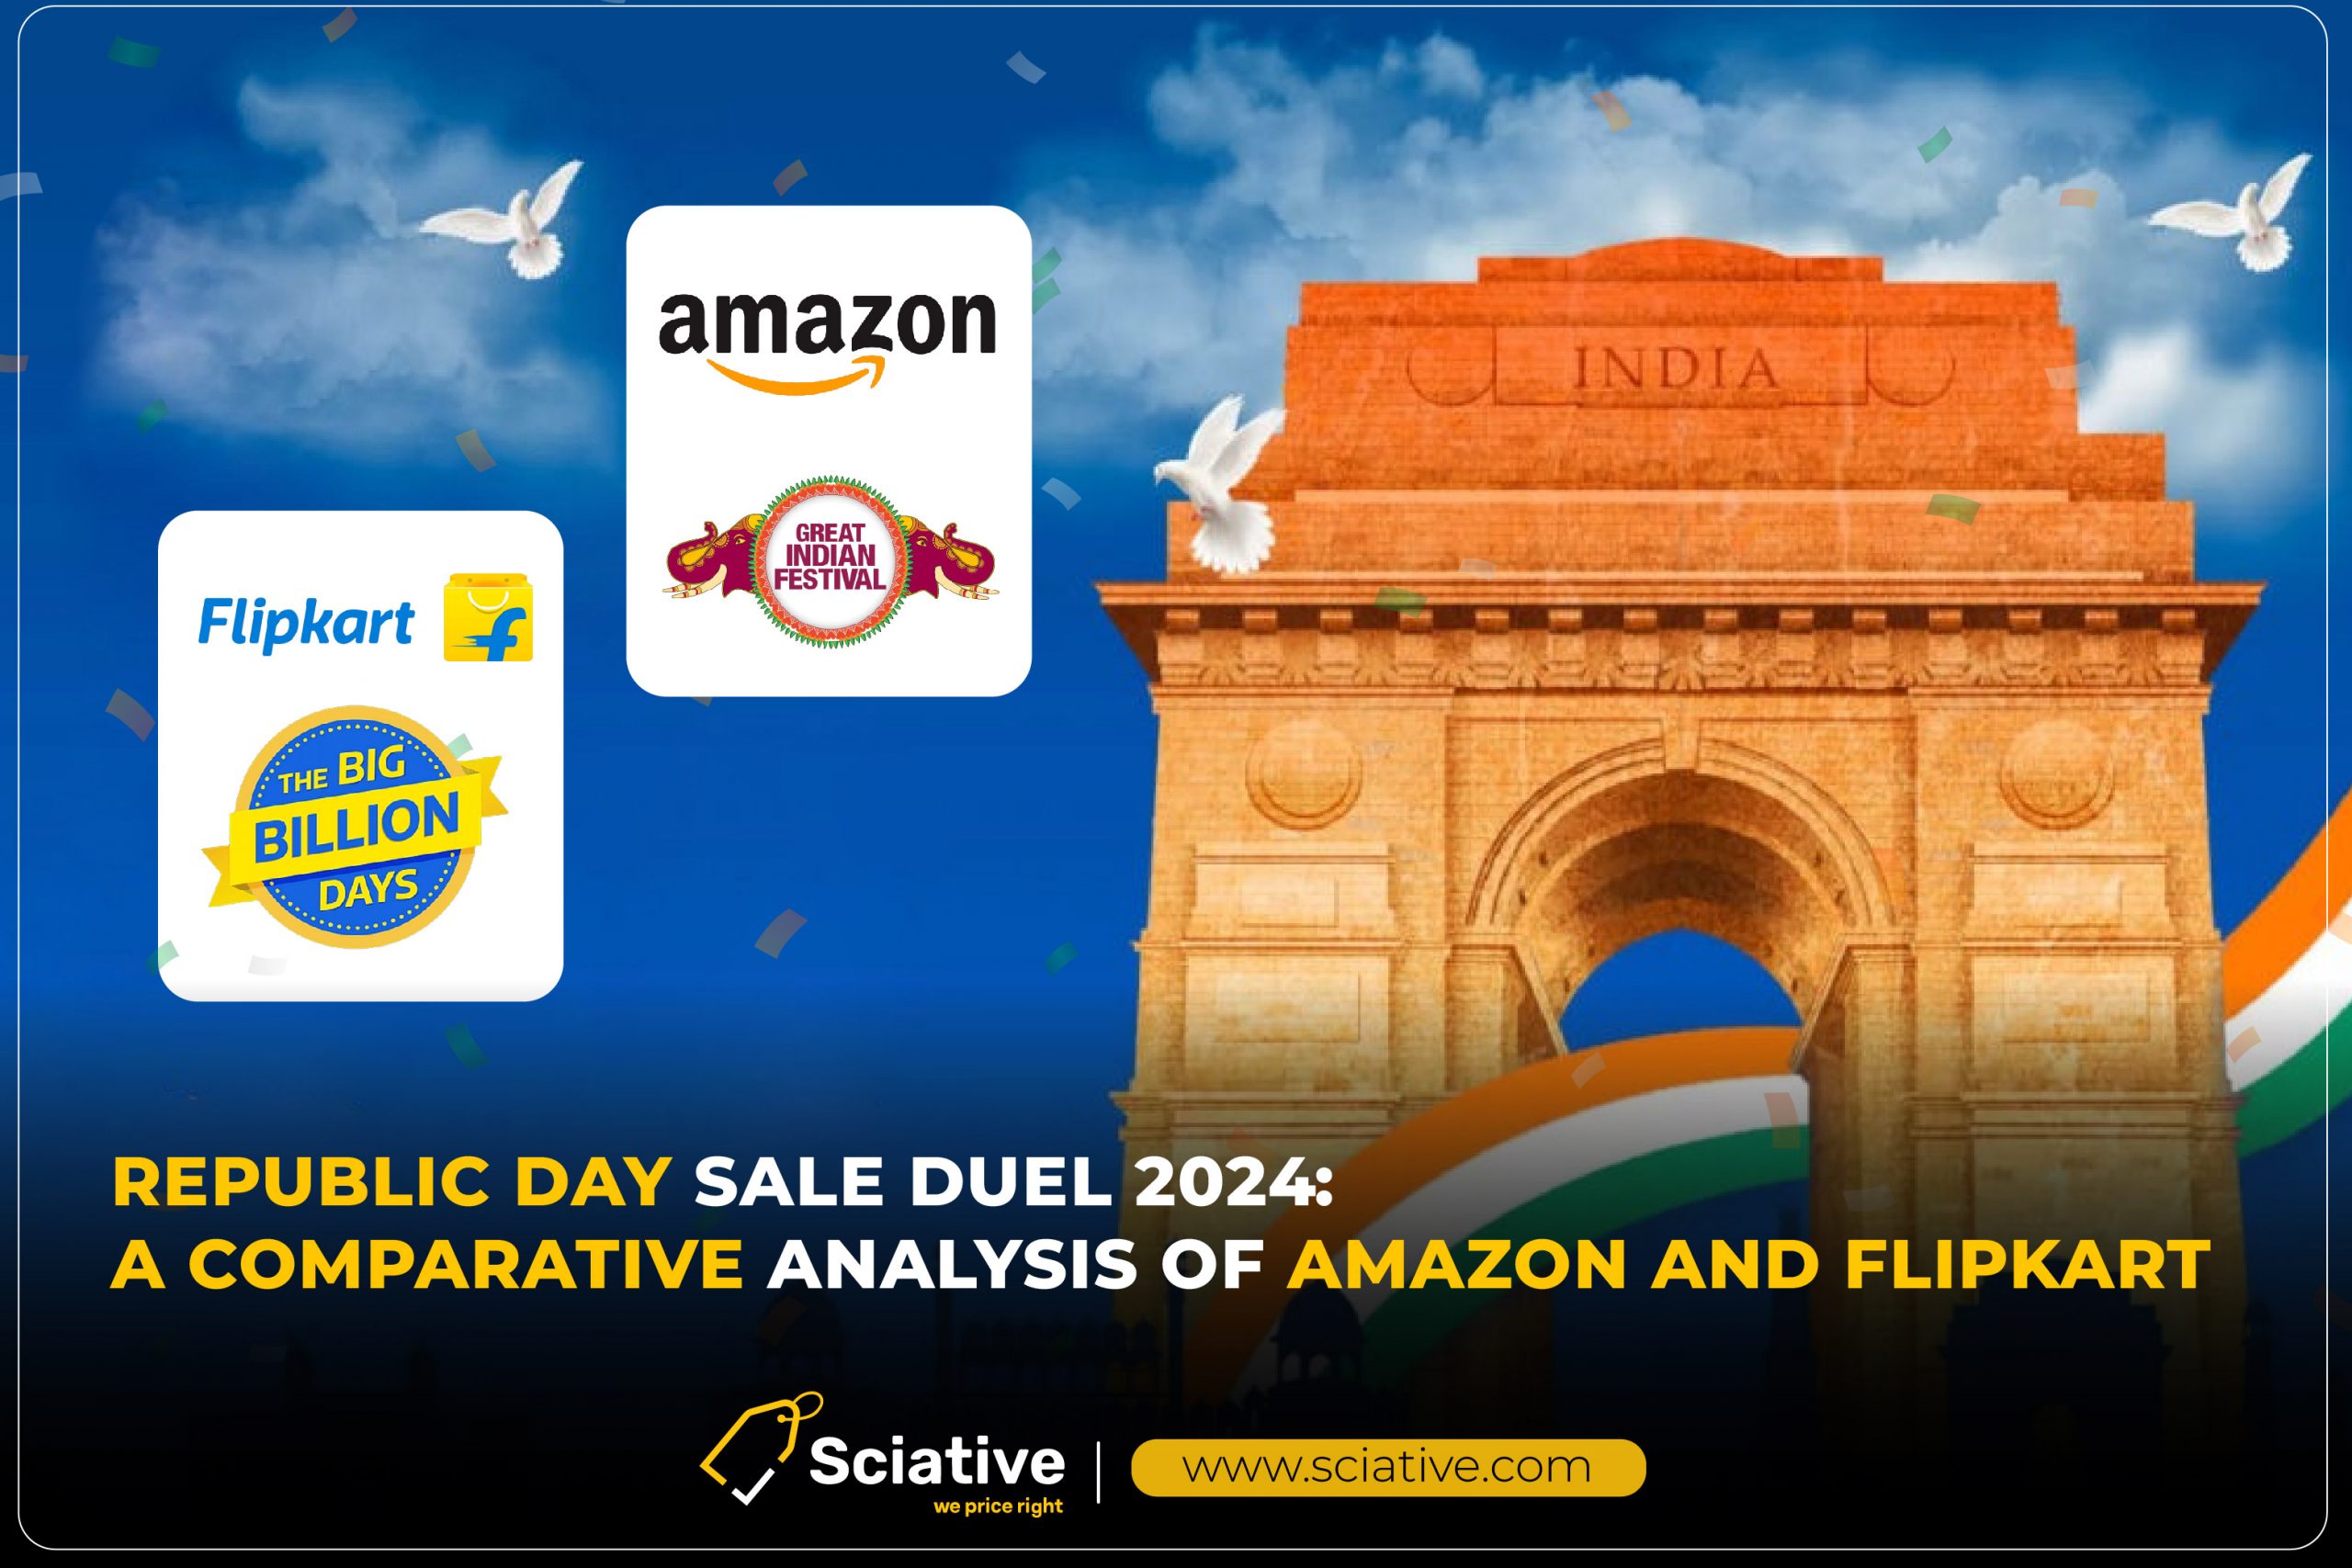 Republic Day Sale Duel 2024: A Comparative Analysis of Amazon and Flipkart